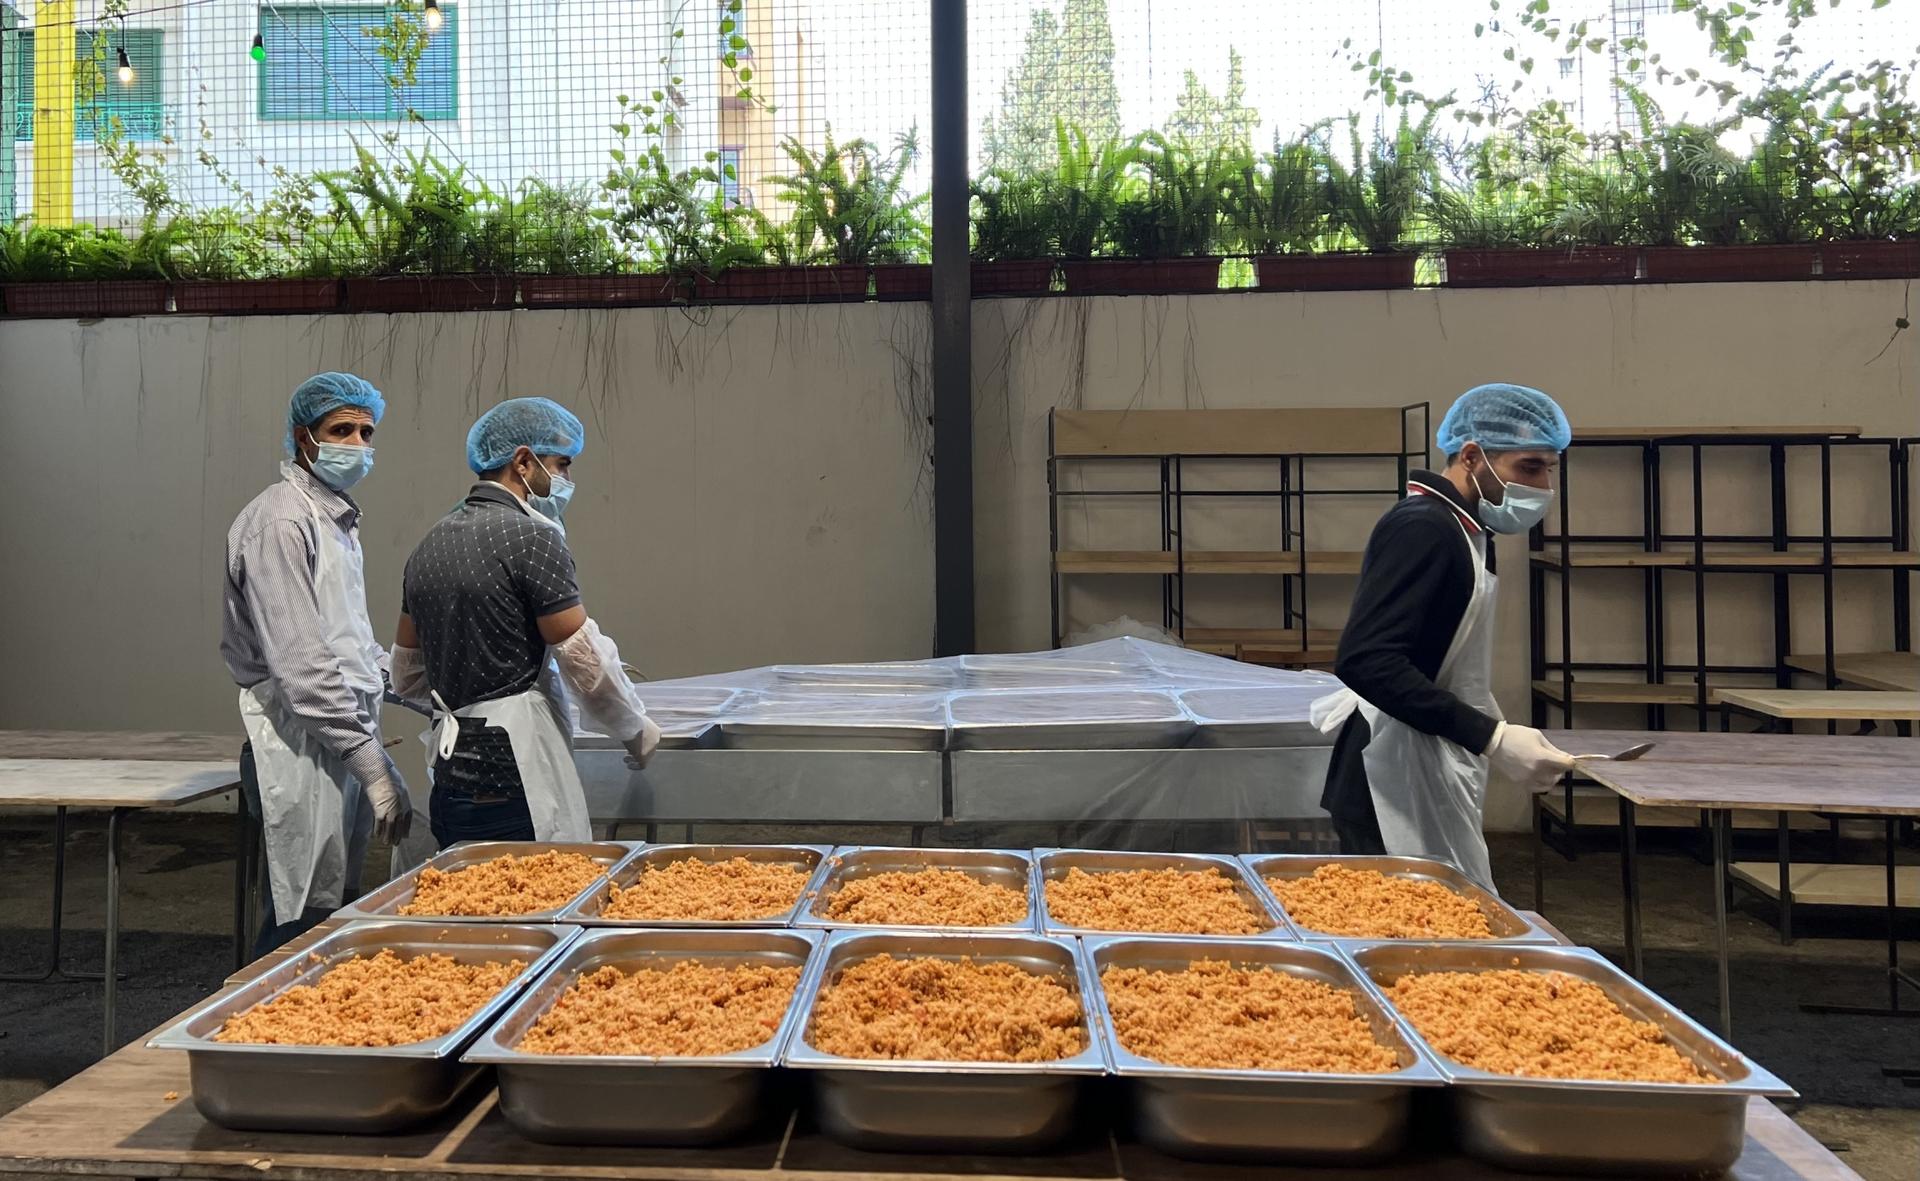 Workers at the Matbakh El Kell Community Kitchen in Beirut prepare food for distribution.